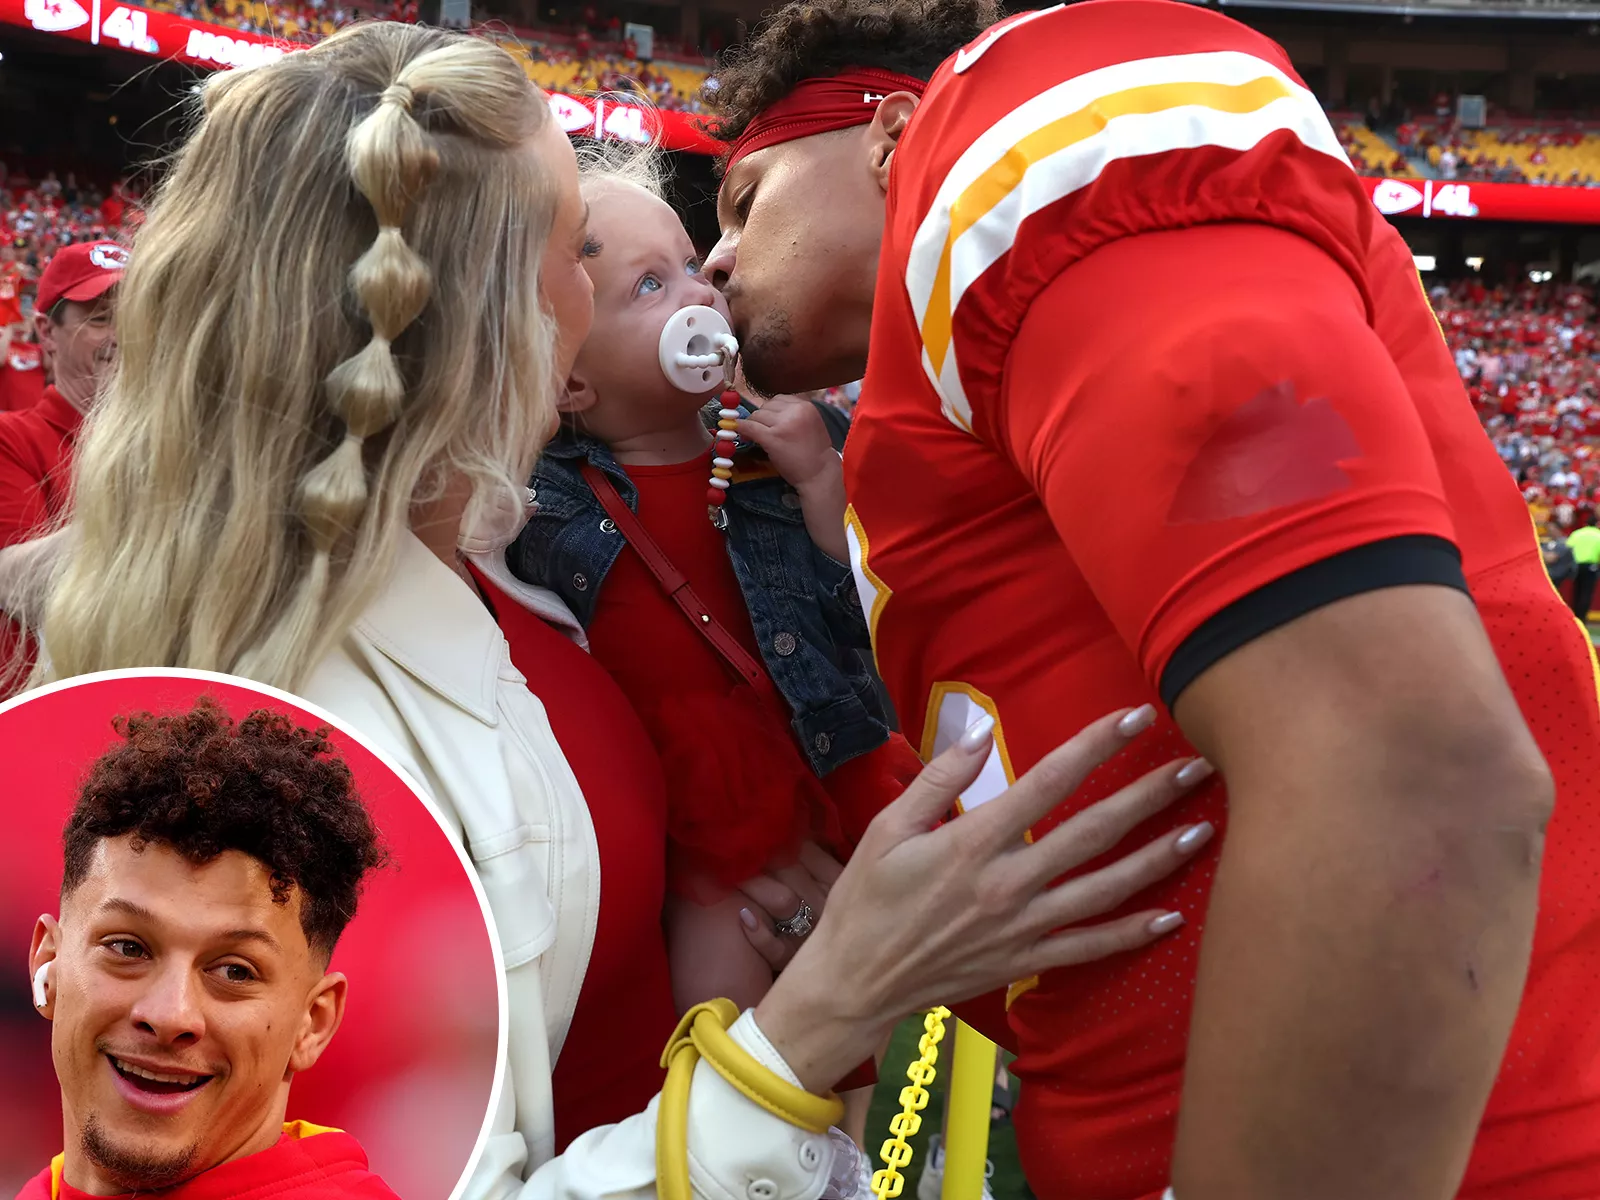 When did Patrick Mahomes propose to Brittany Matthews?